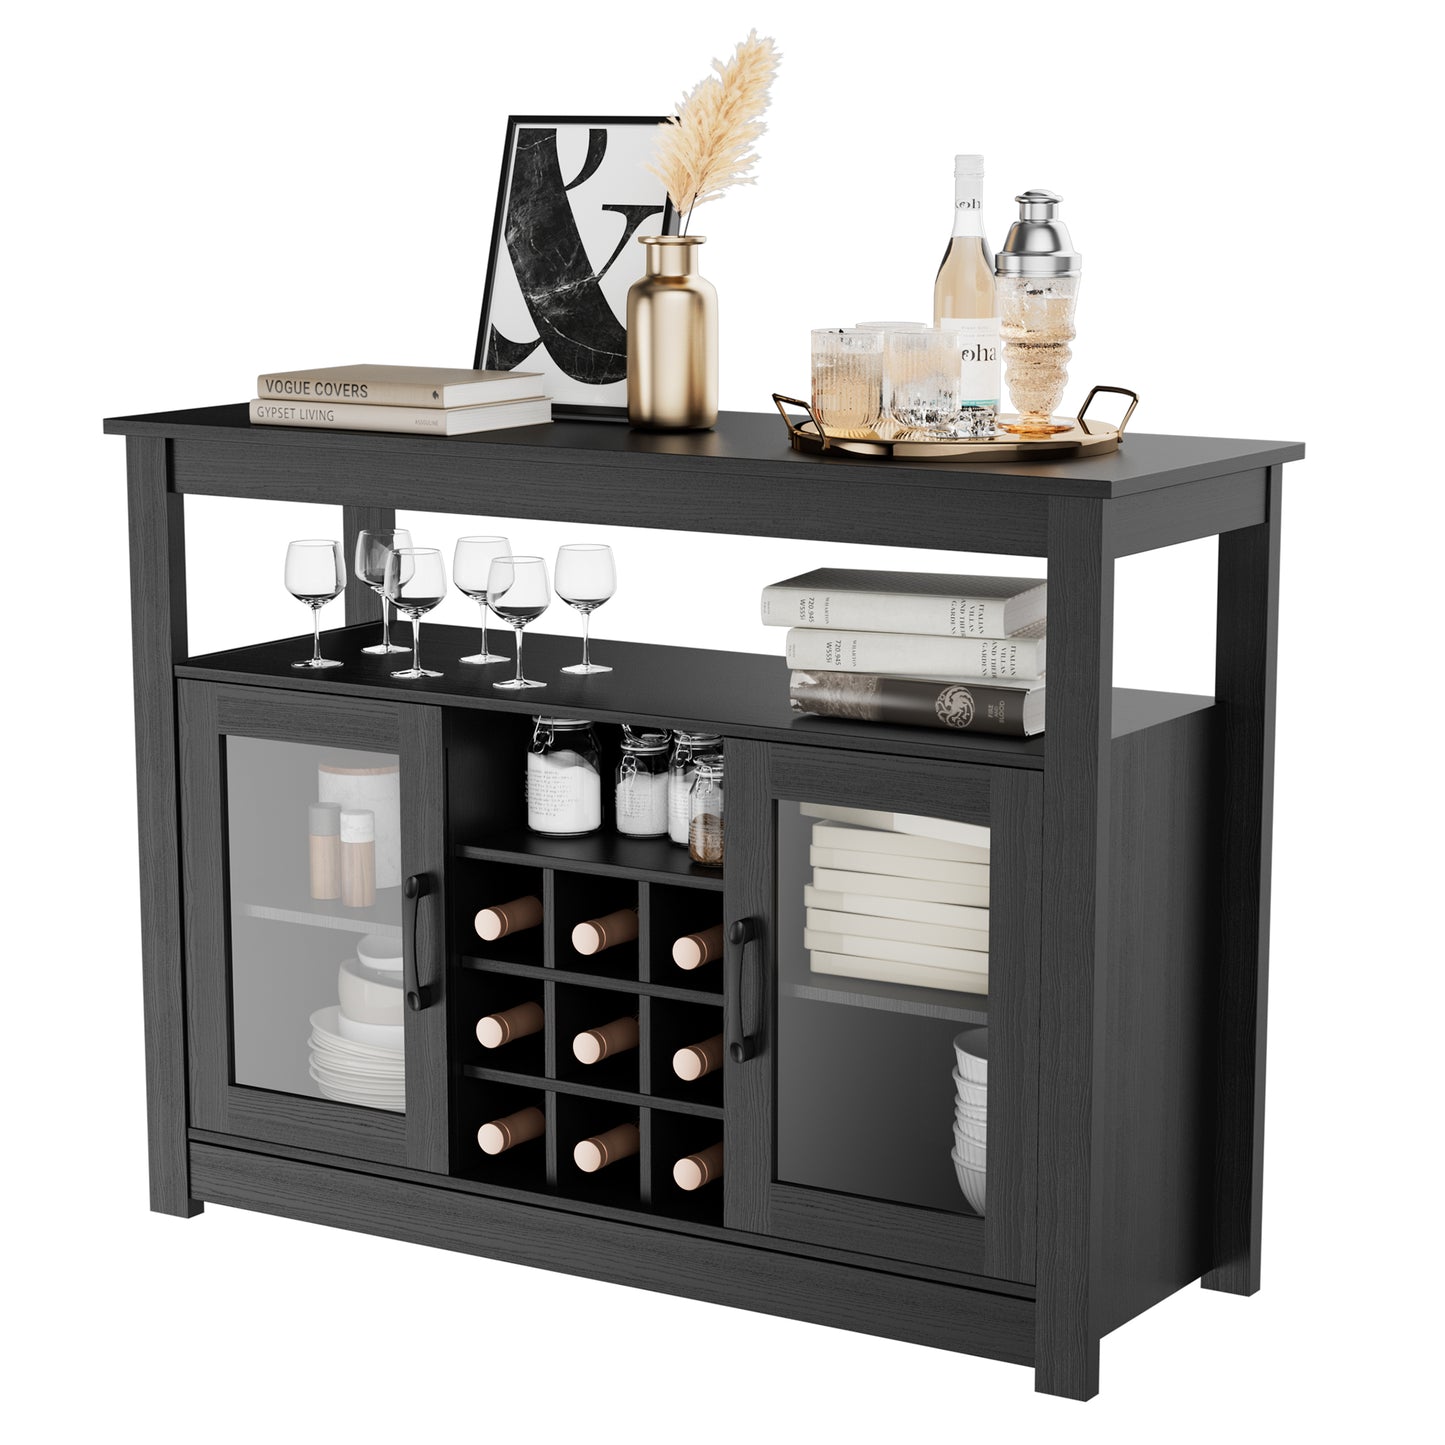 Buffet Sideboard, Freestanding Buffet Storage Cabinet, Wine Liquor Bar Buffet Cabinet with Removable Wine Rack for Kitchen, Living Room, Dining Room, Black